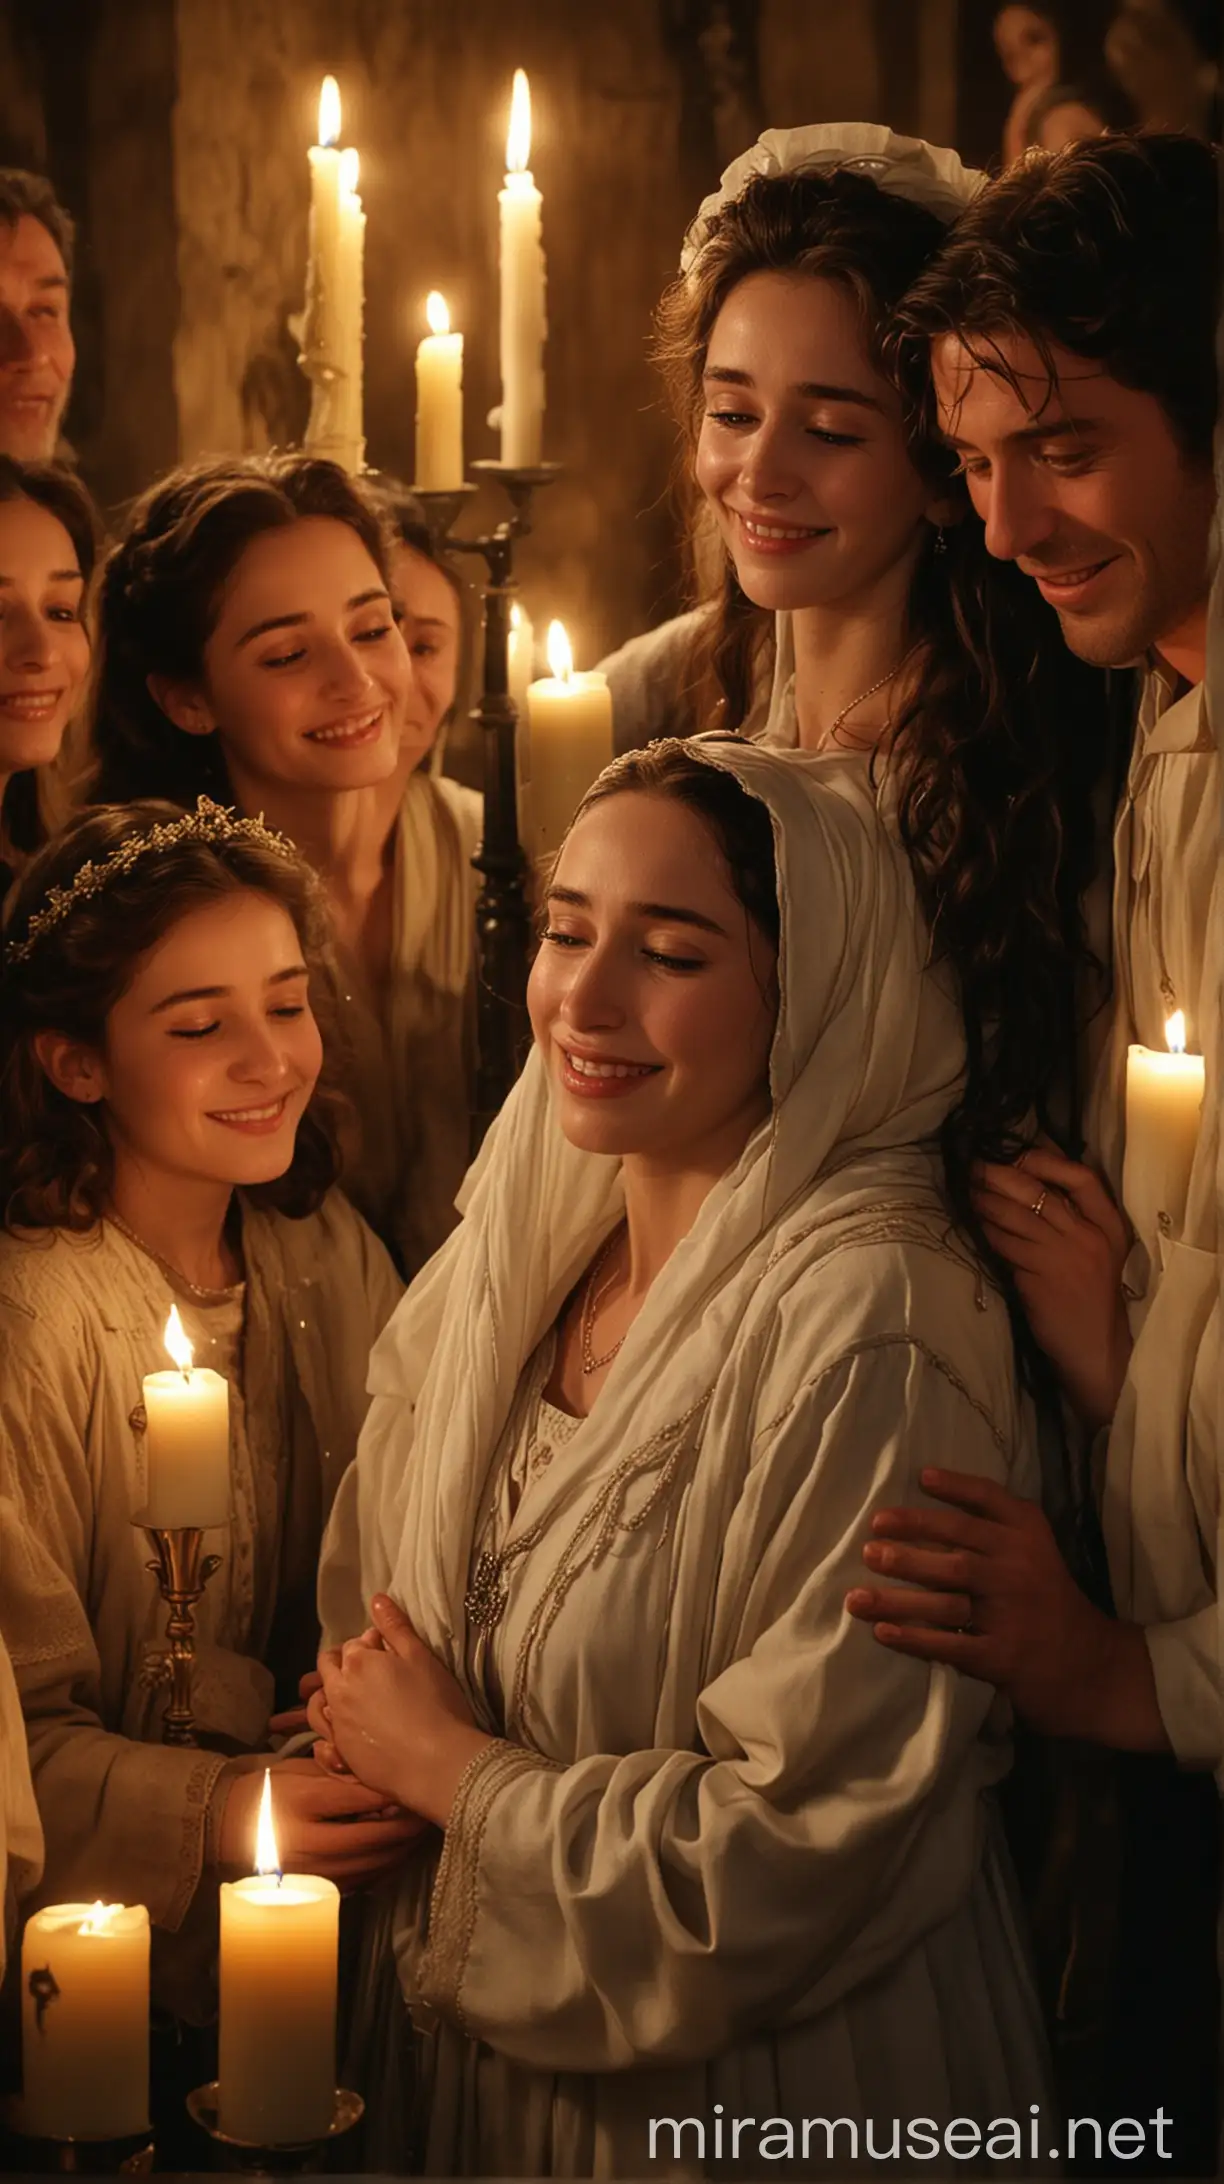 A heartwarming scene showing Mary and others embracing Peter warmly, with tears of joy streaming down their faces. Show Rhoda a beautiful young Jewish girl beaming with happiness in the background, surrounded by candles and symbols of faith."In ancient world 